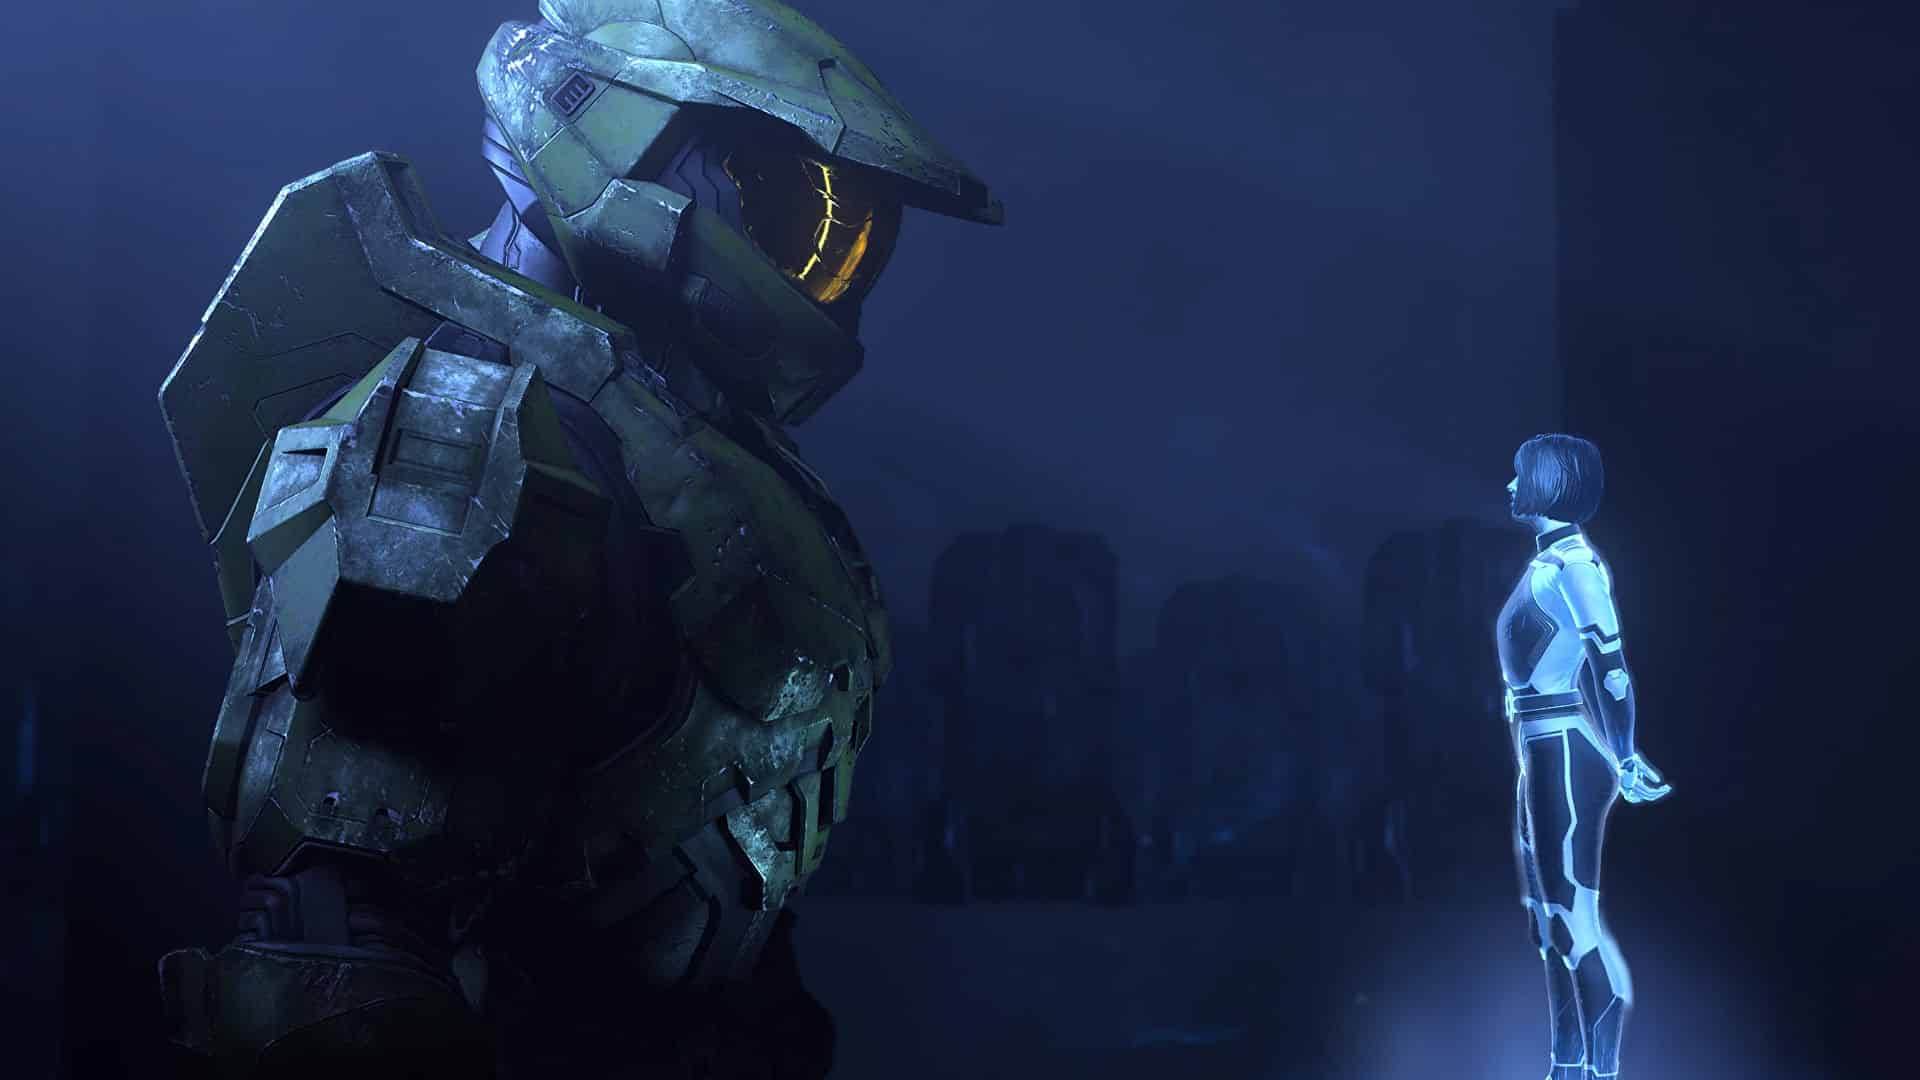 Halo Infinite Campaign Overview trailer released